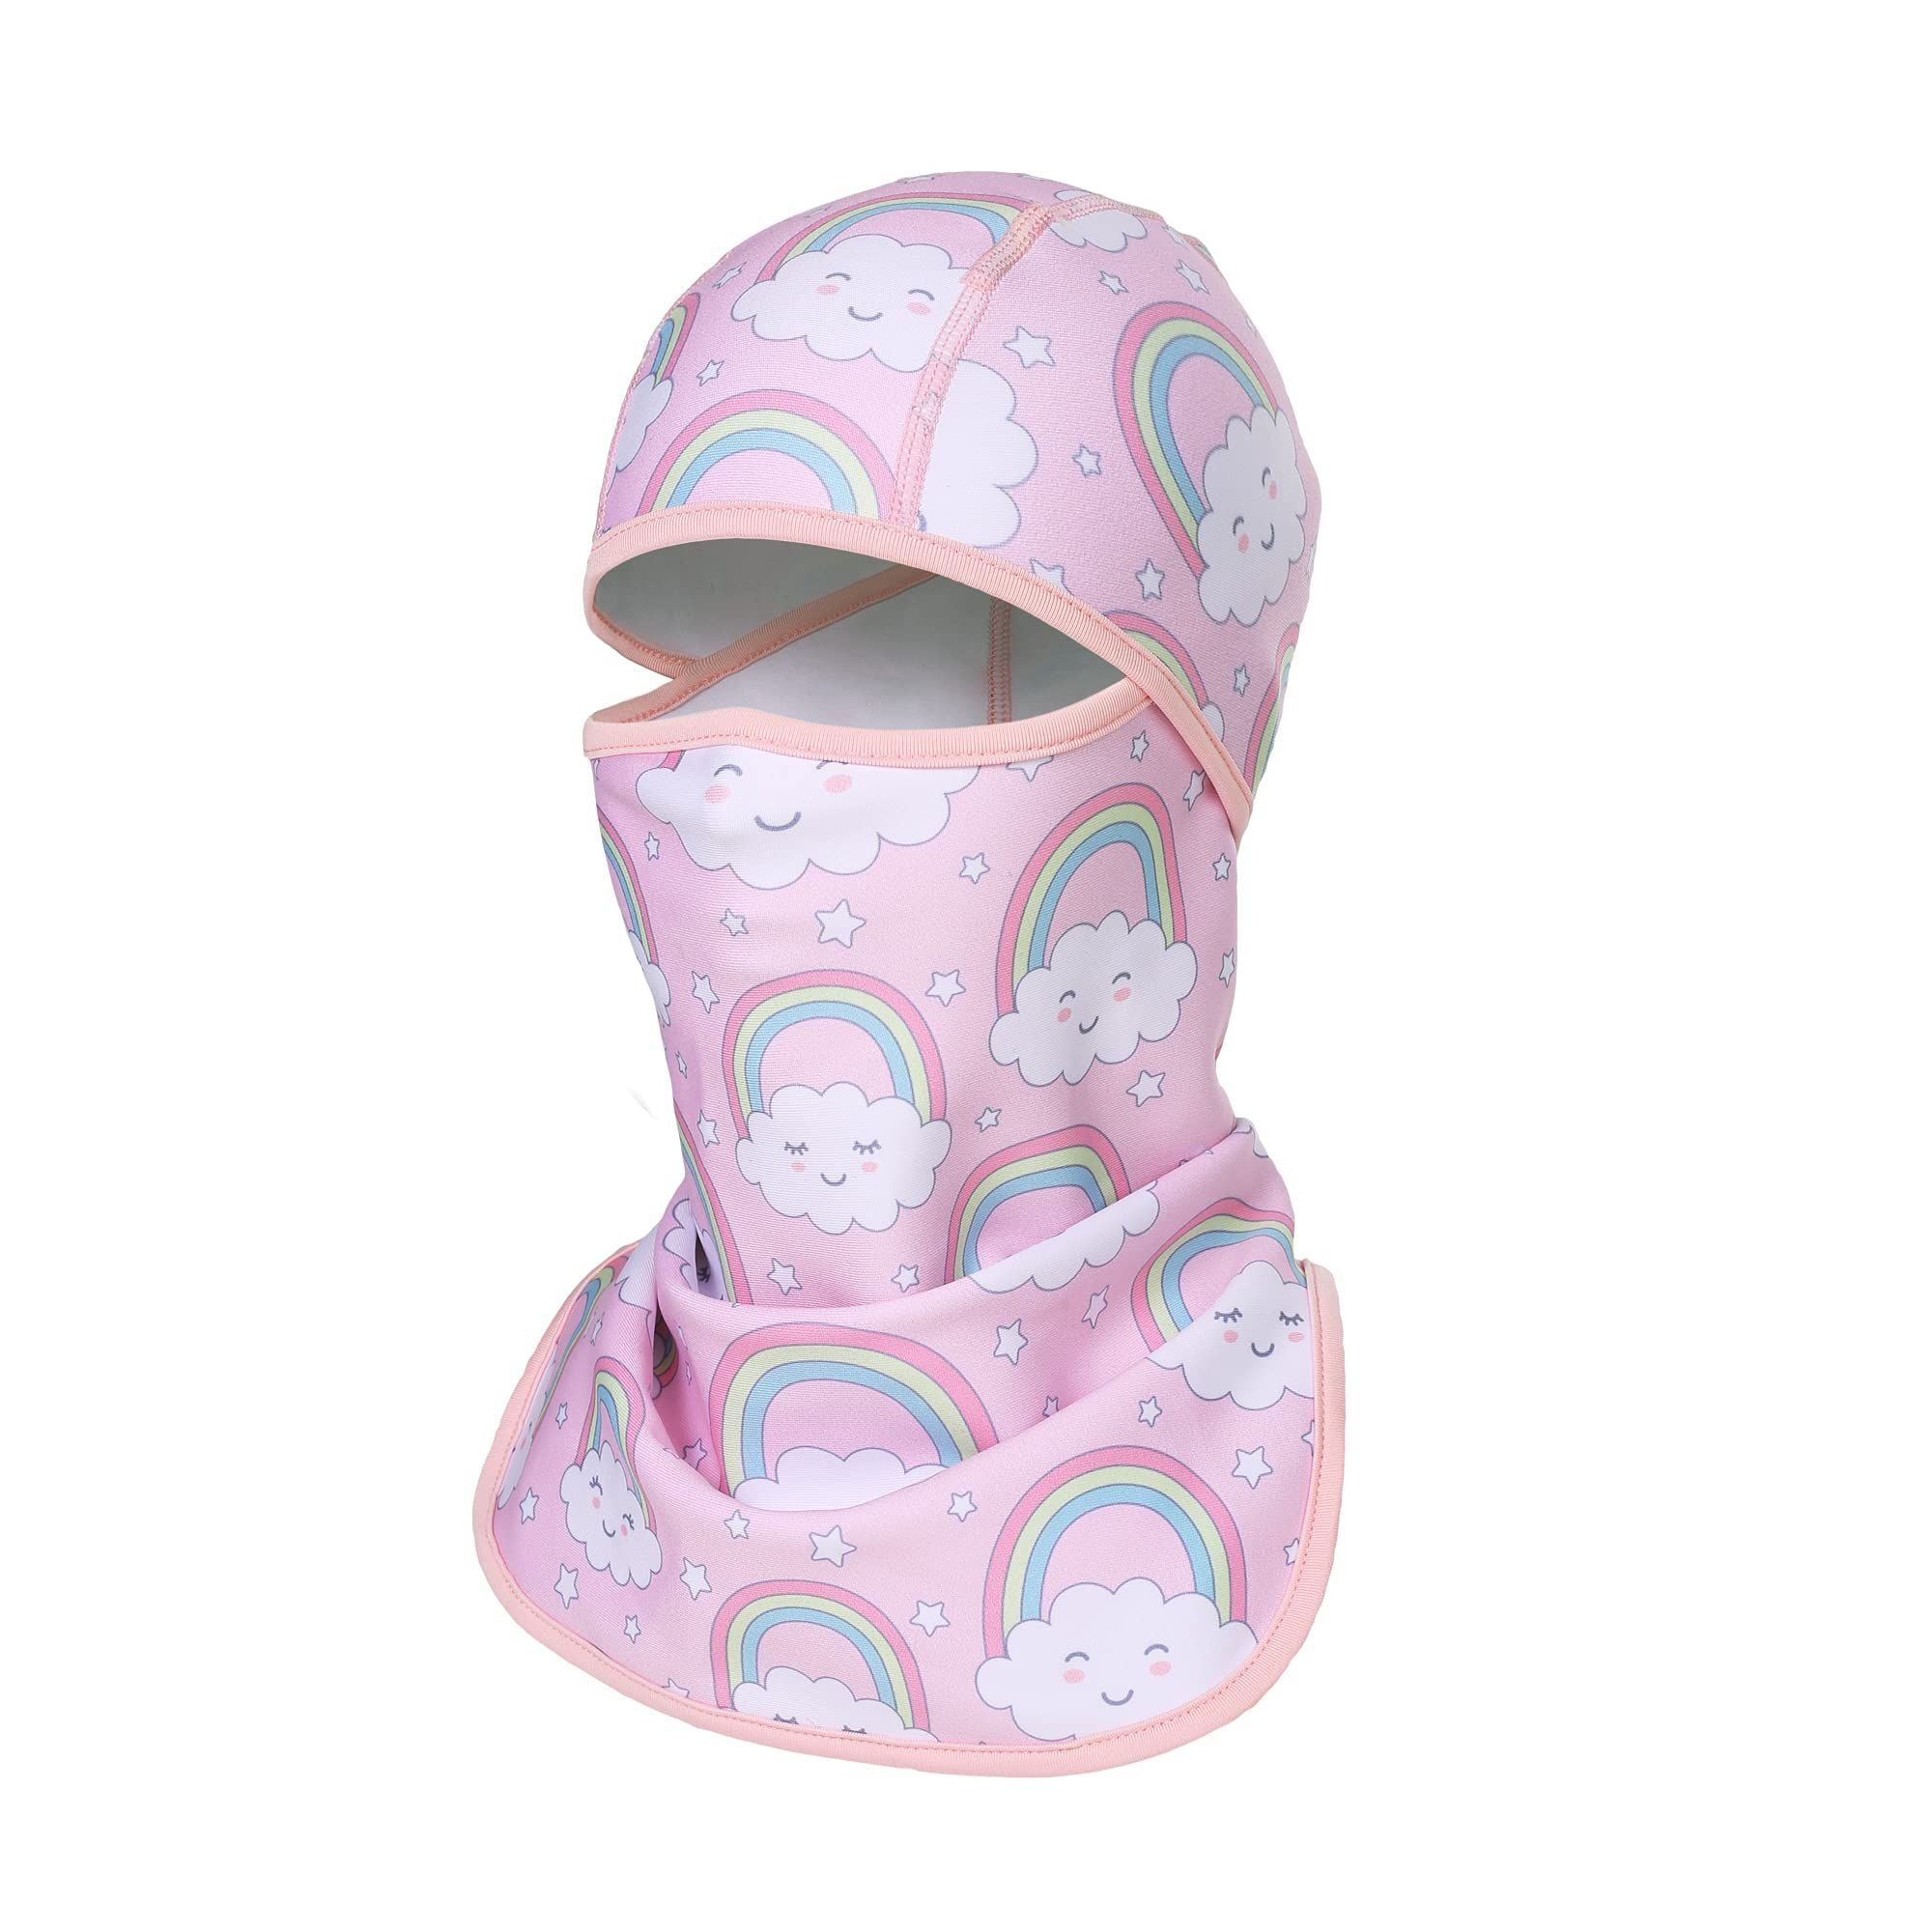 Your Choice Kids Balaclava Ski Cycling Face Mask for Cold Weather Girl Boy Childrens Winter Outdoor Fleece 